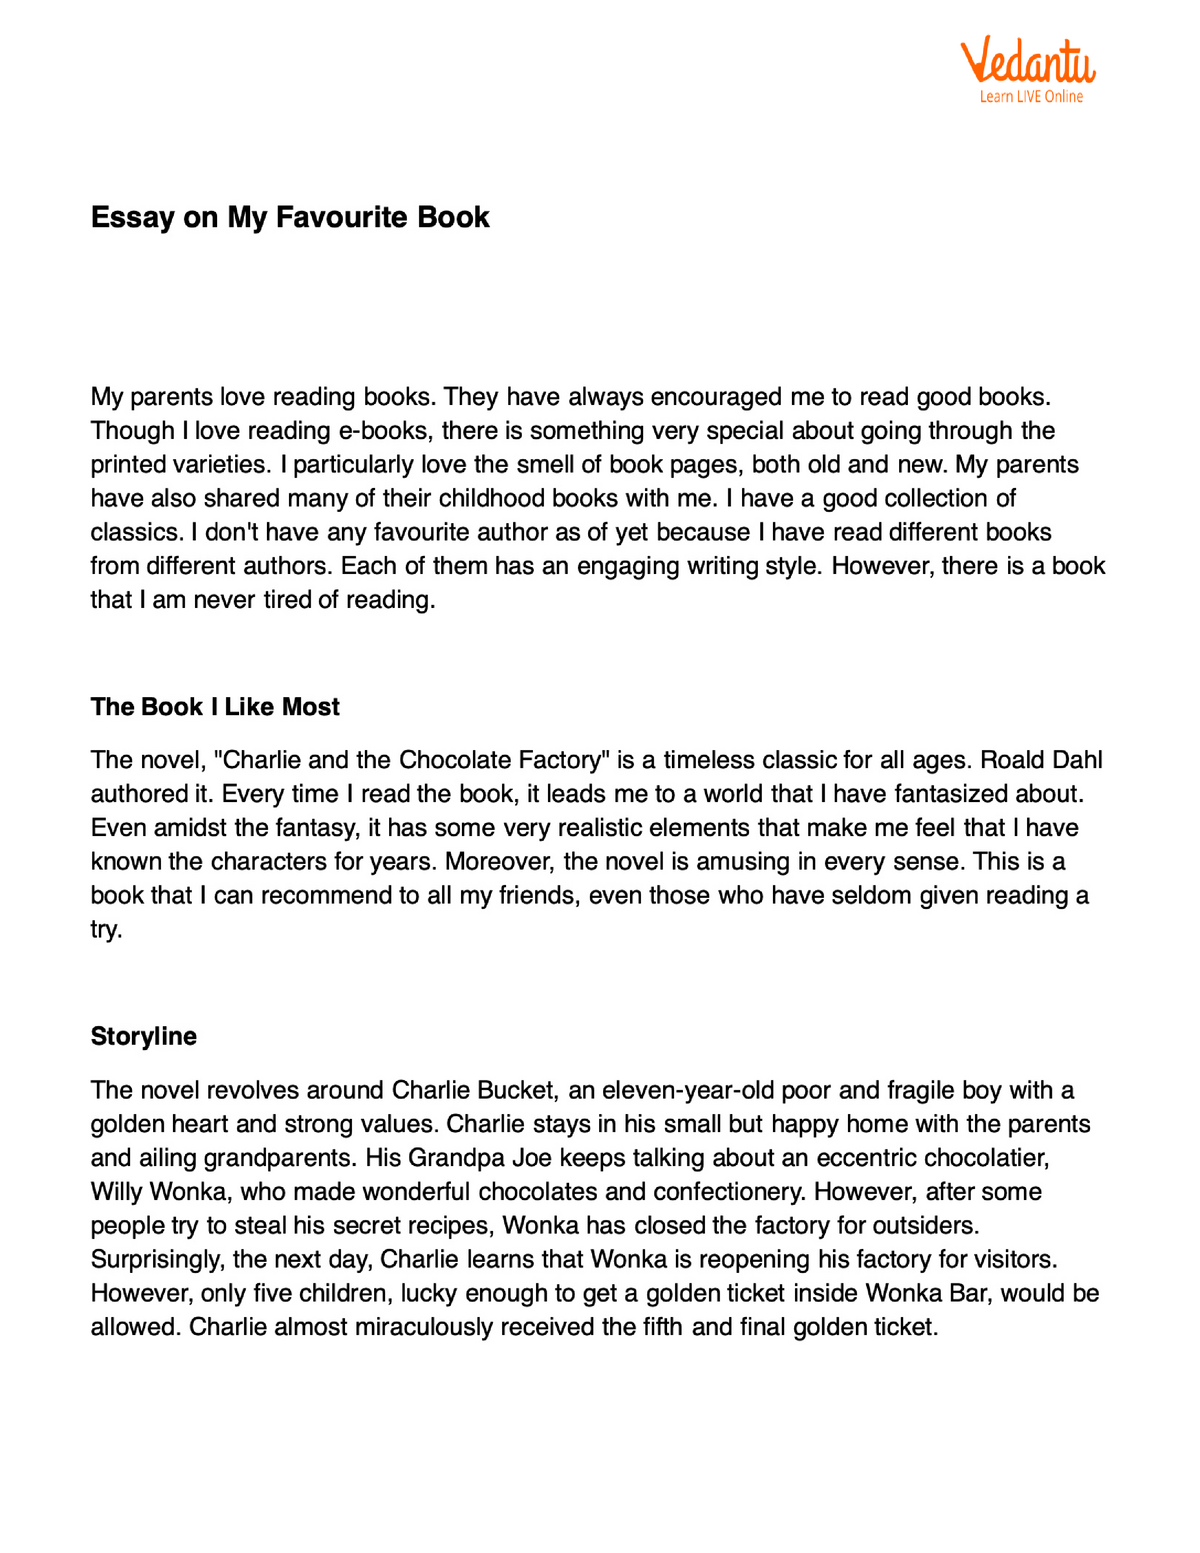 my favourite book essay 1000 words